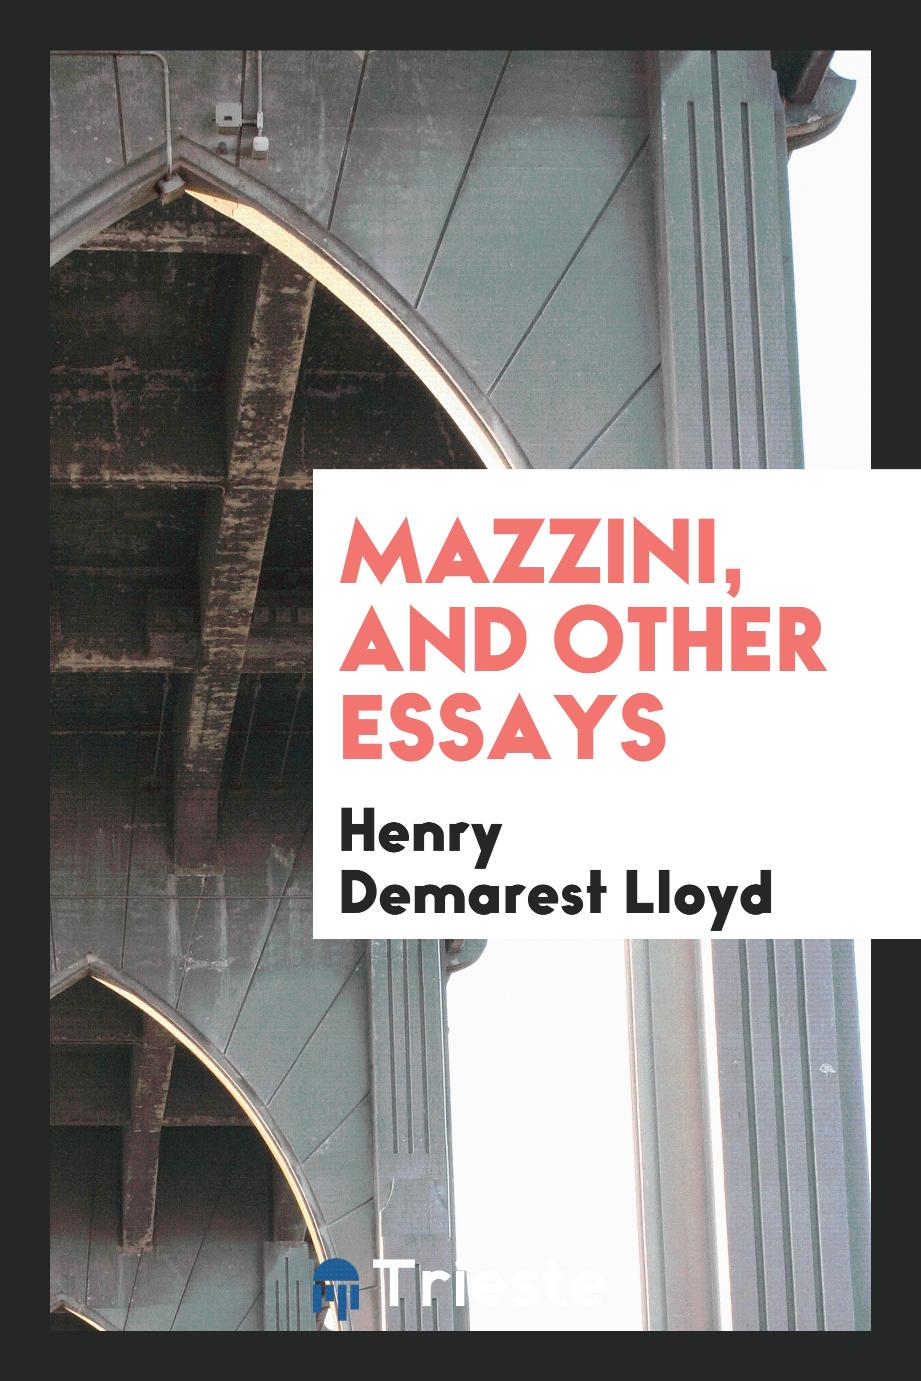 Mazzini, and other essays